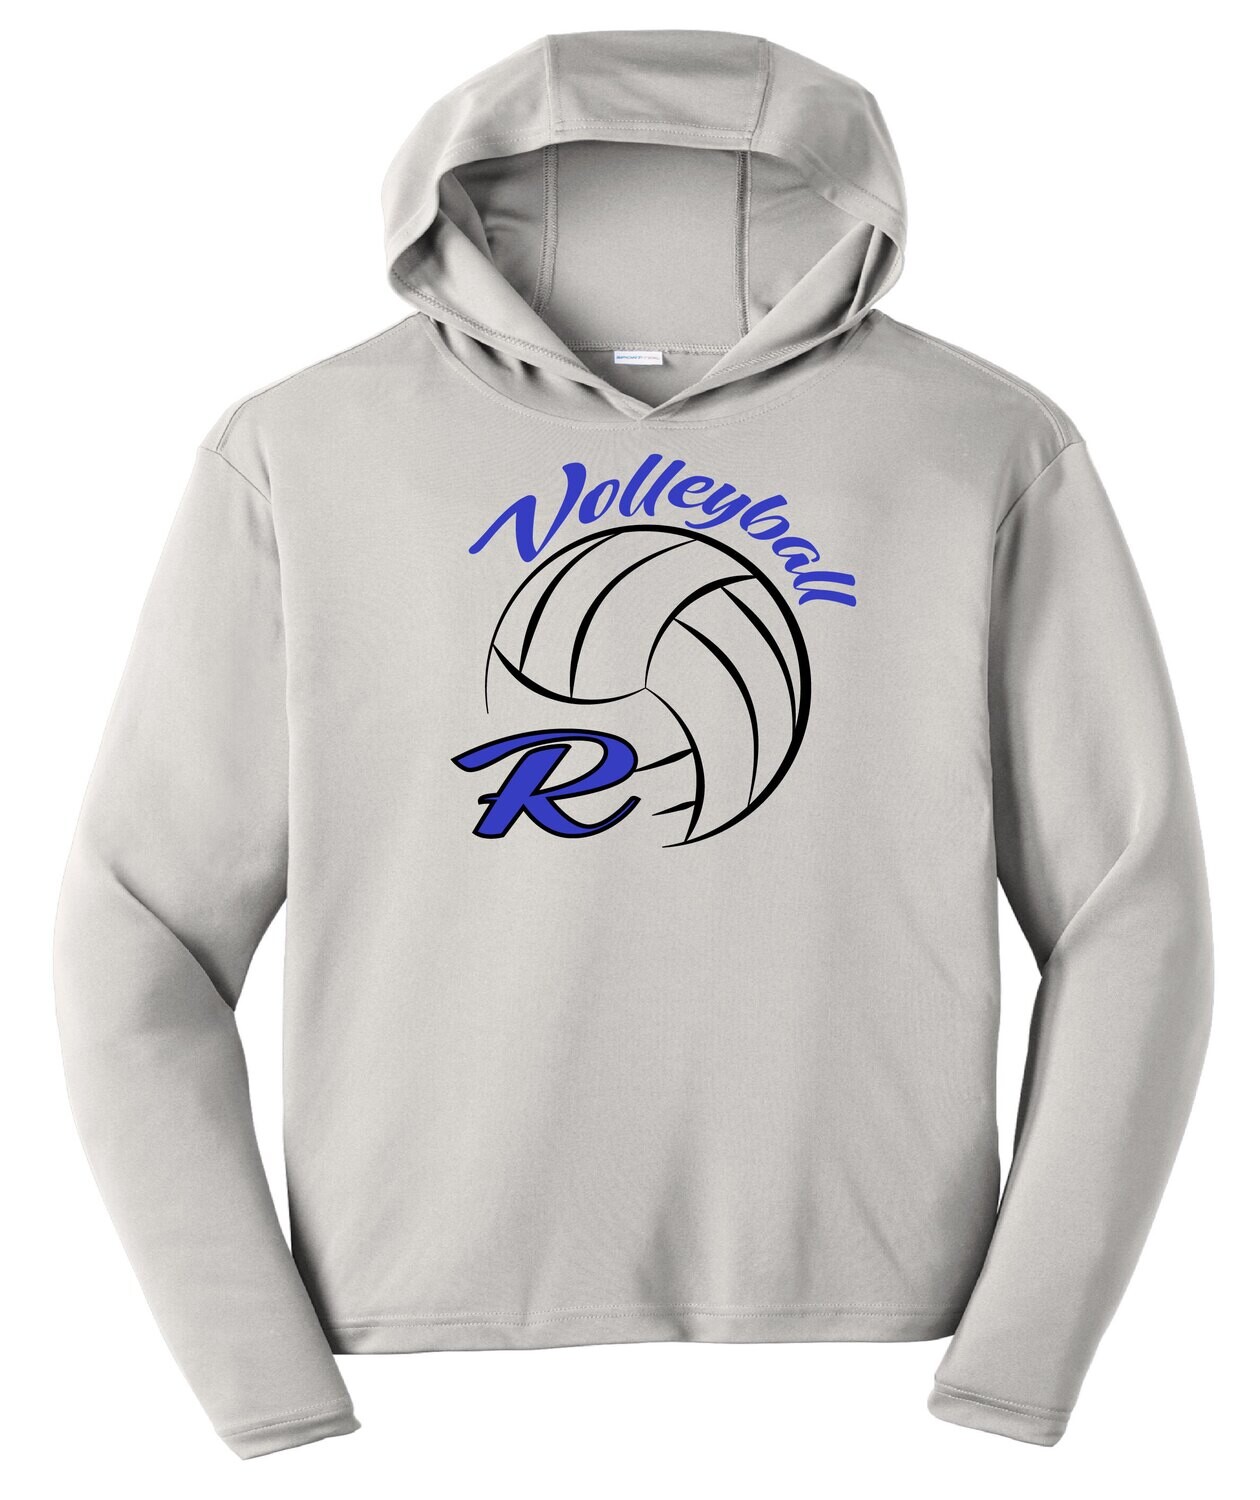 Sport-Tek ® PosiCharge ® Competitor ™ Hooded Pullover R-Volley Logo